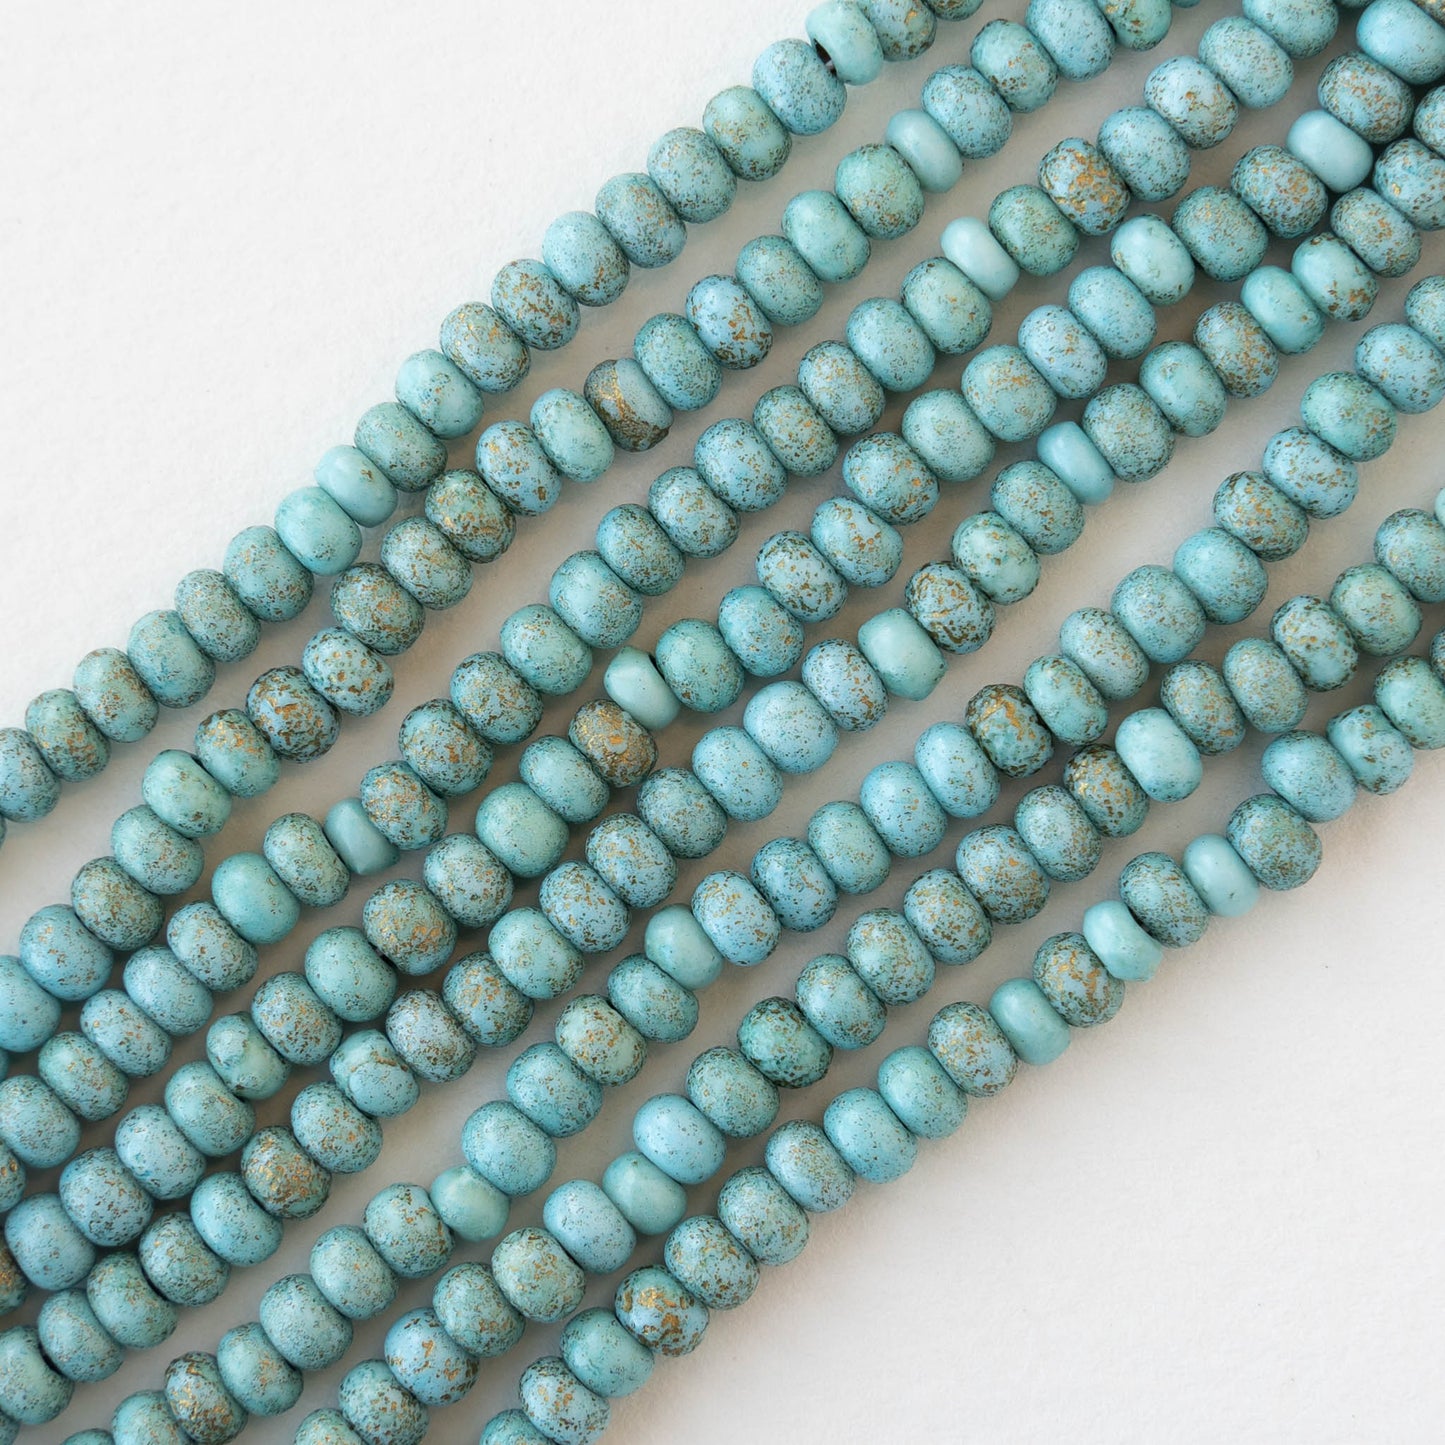 Size 6 Seed Beads - Opaque Aqua with Gold Dust - Choose Amount